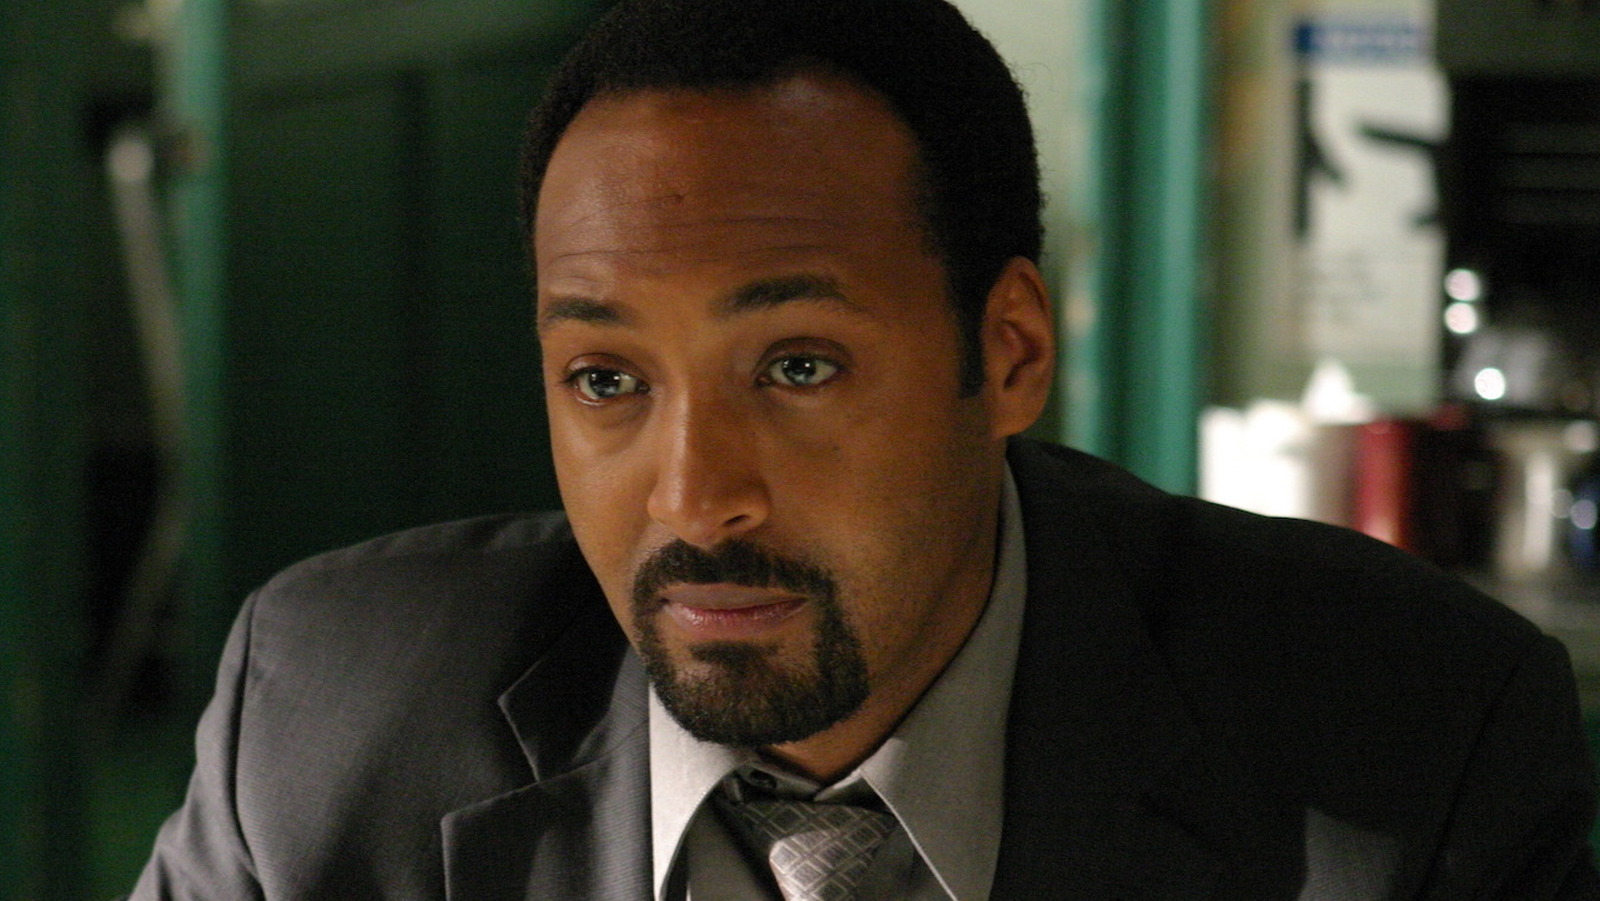 The Real Reason Jesse L. Martin Left Law & Order